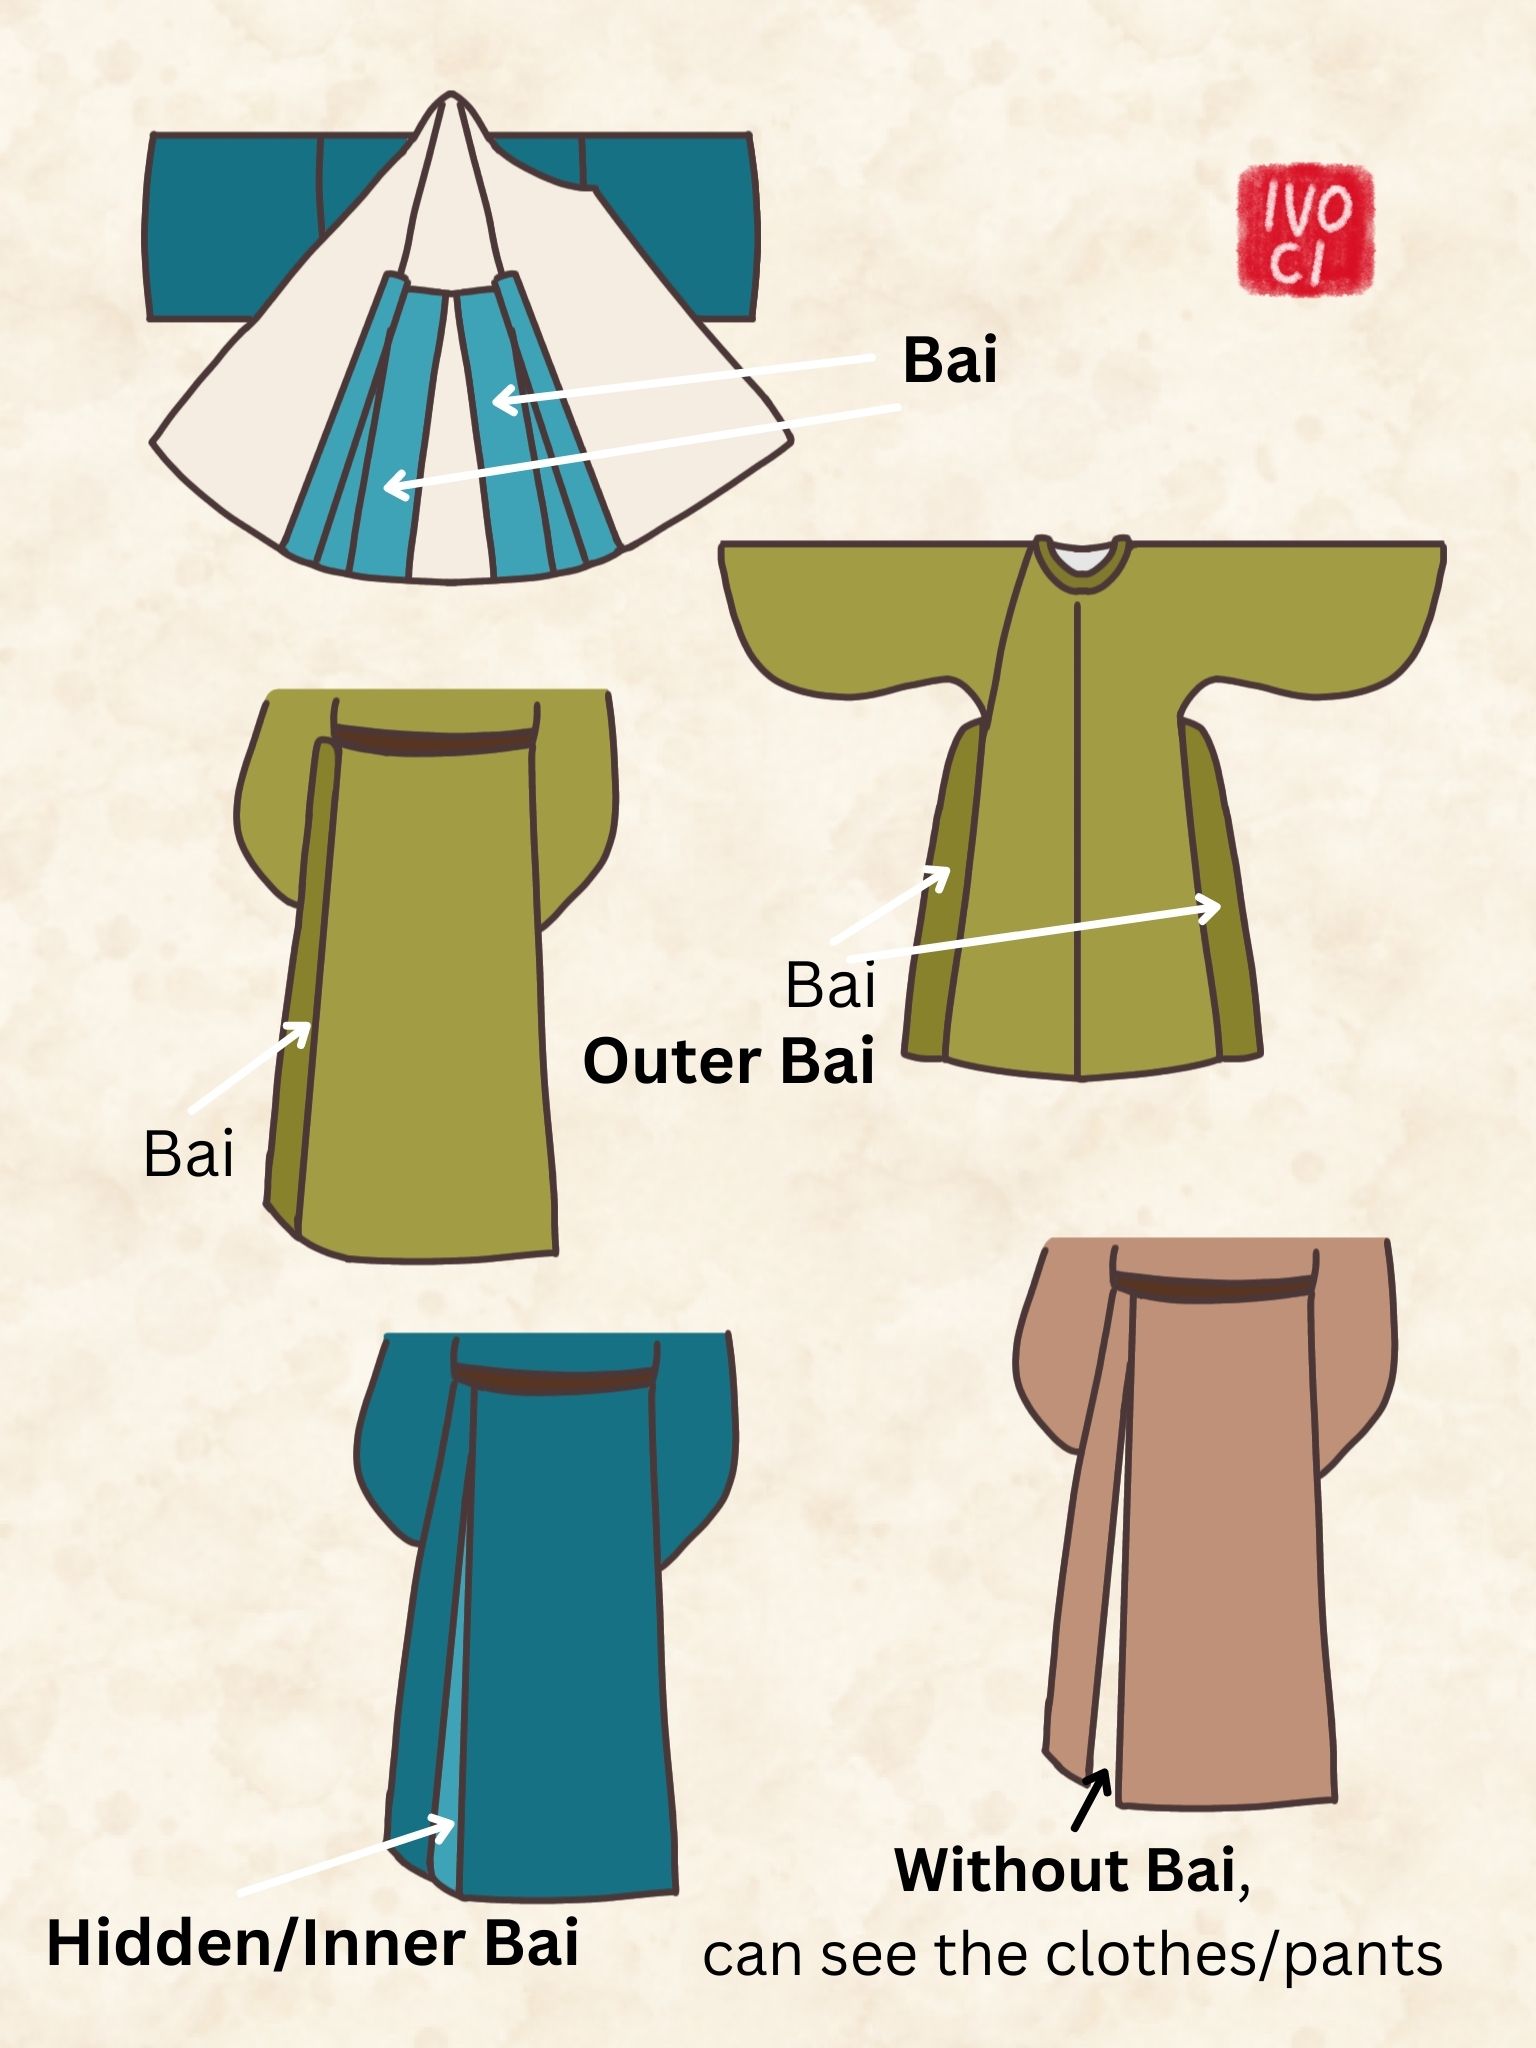 ivoci - Easily Confused Hanfu Structures - 4